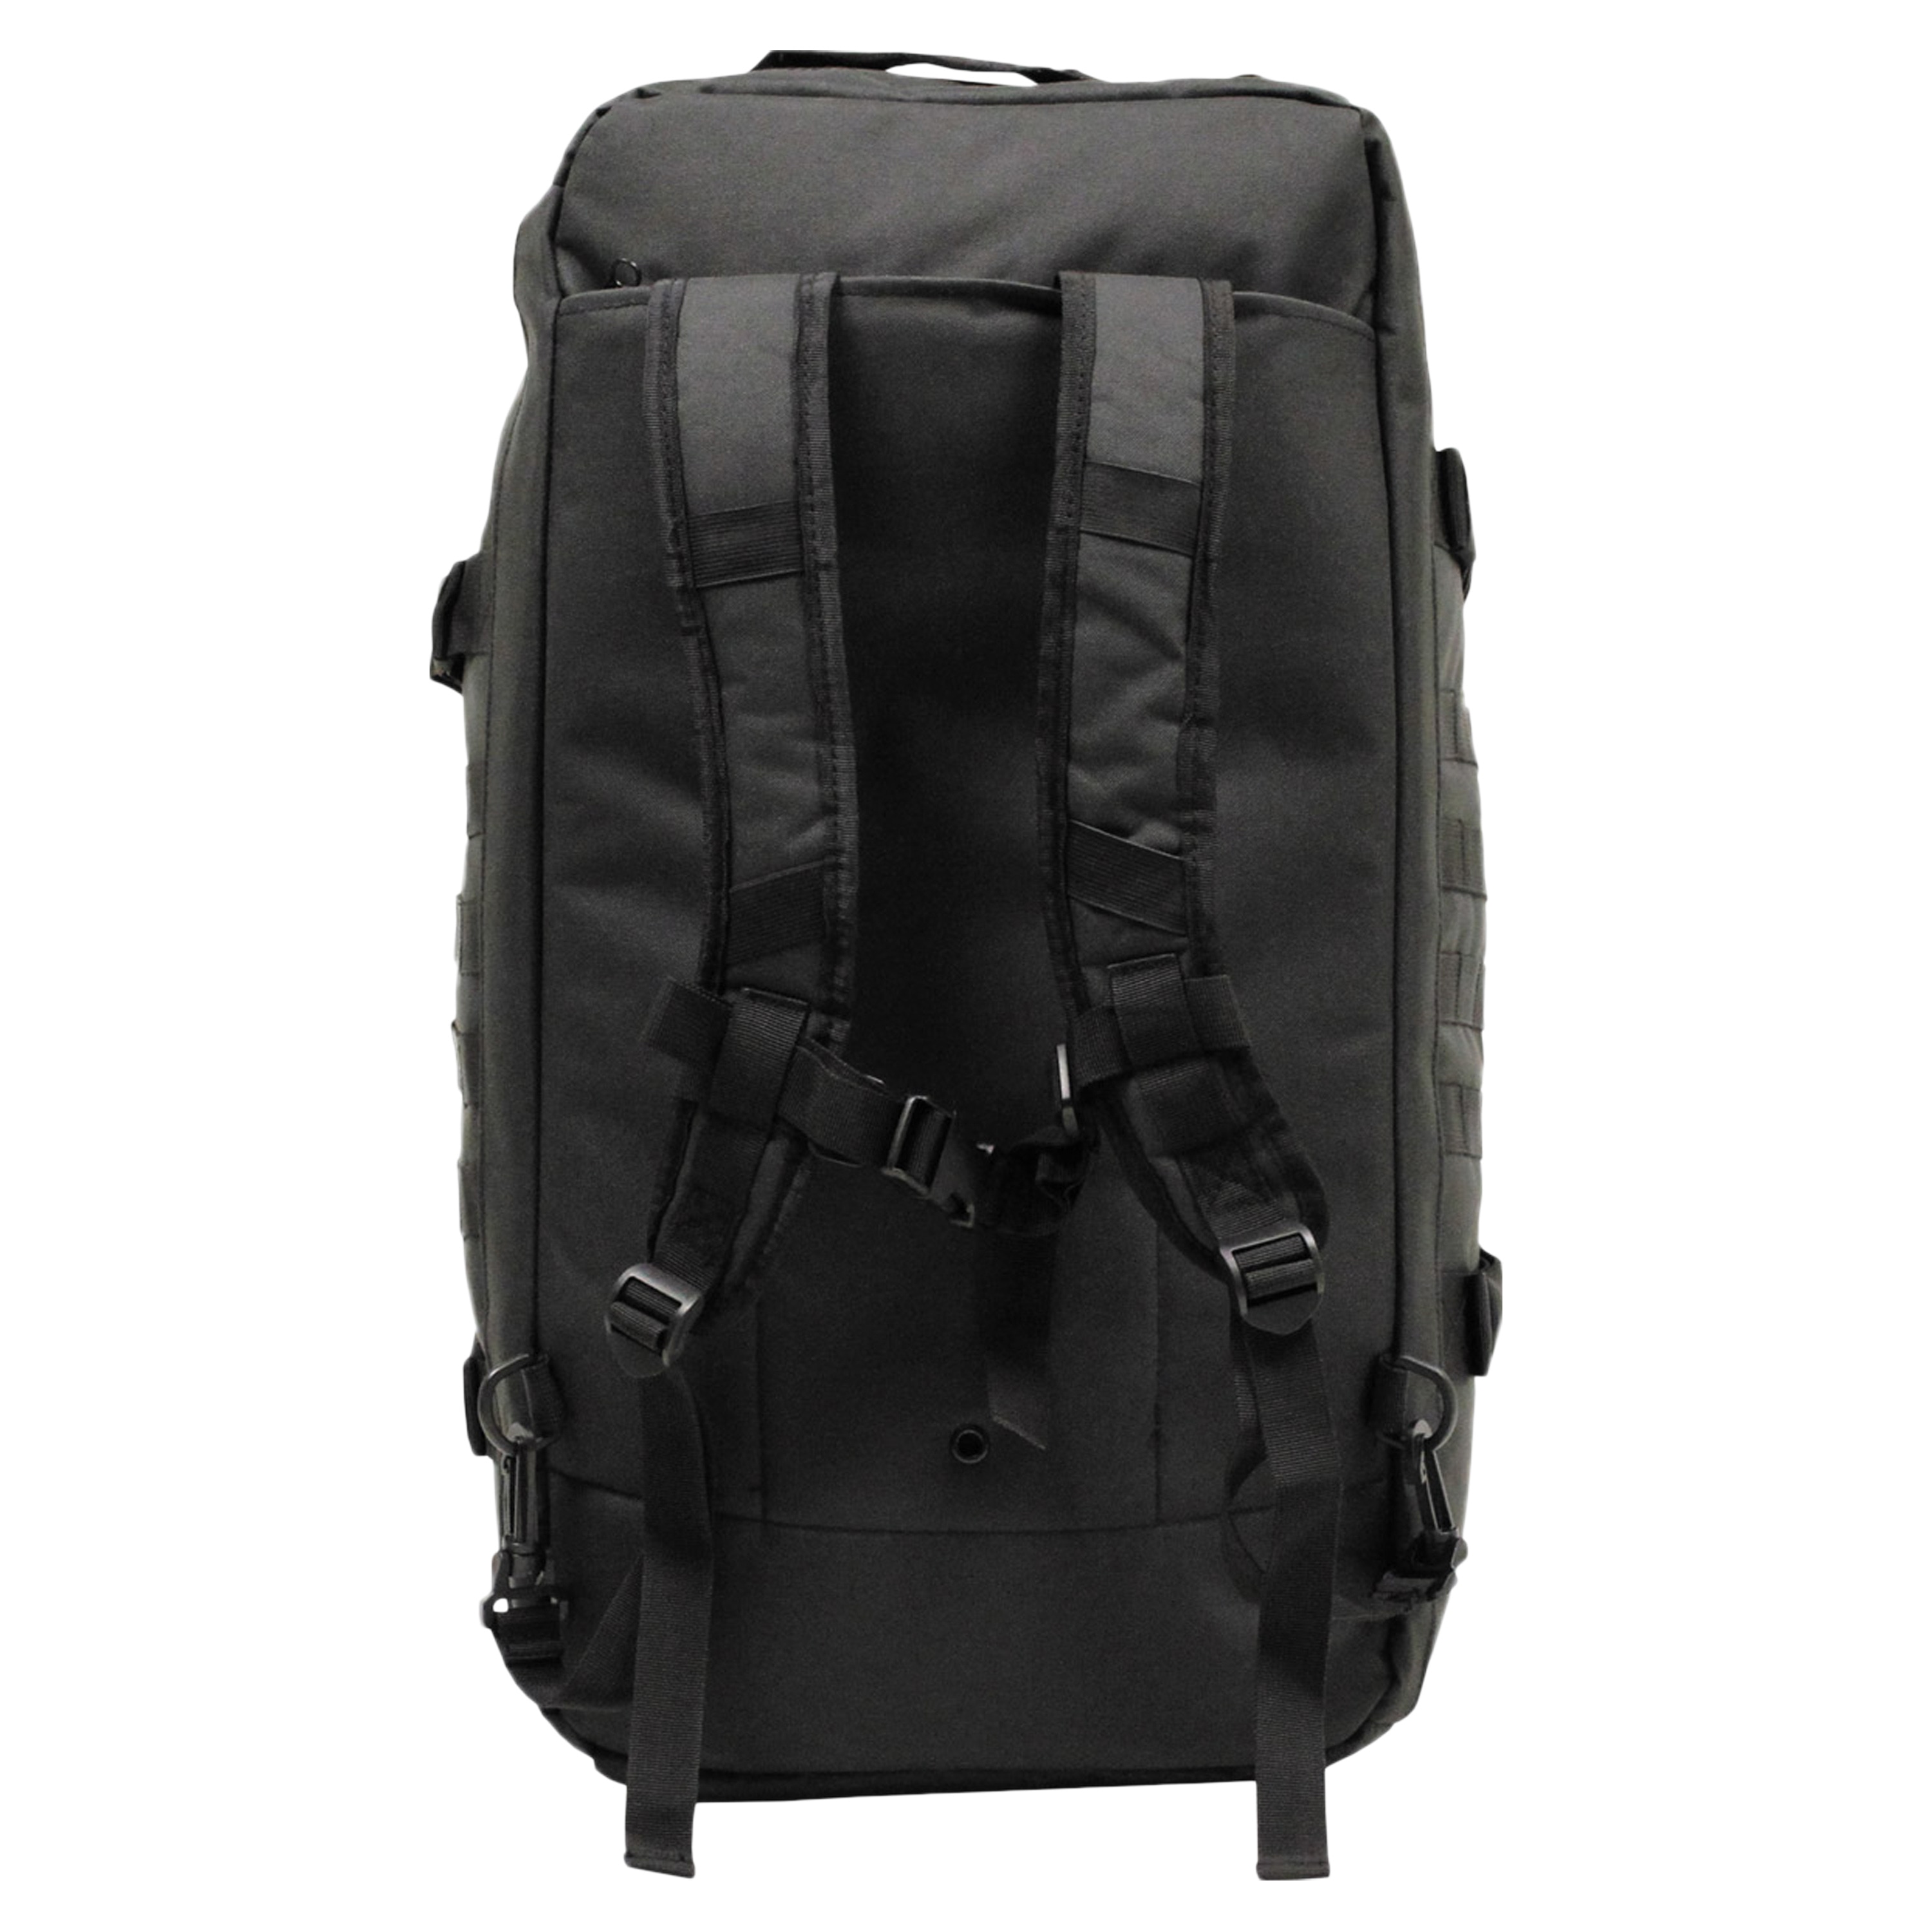 Purchase the MFH Backpack Travel Bag black by ASMC